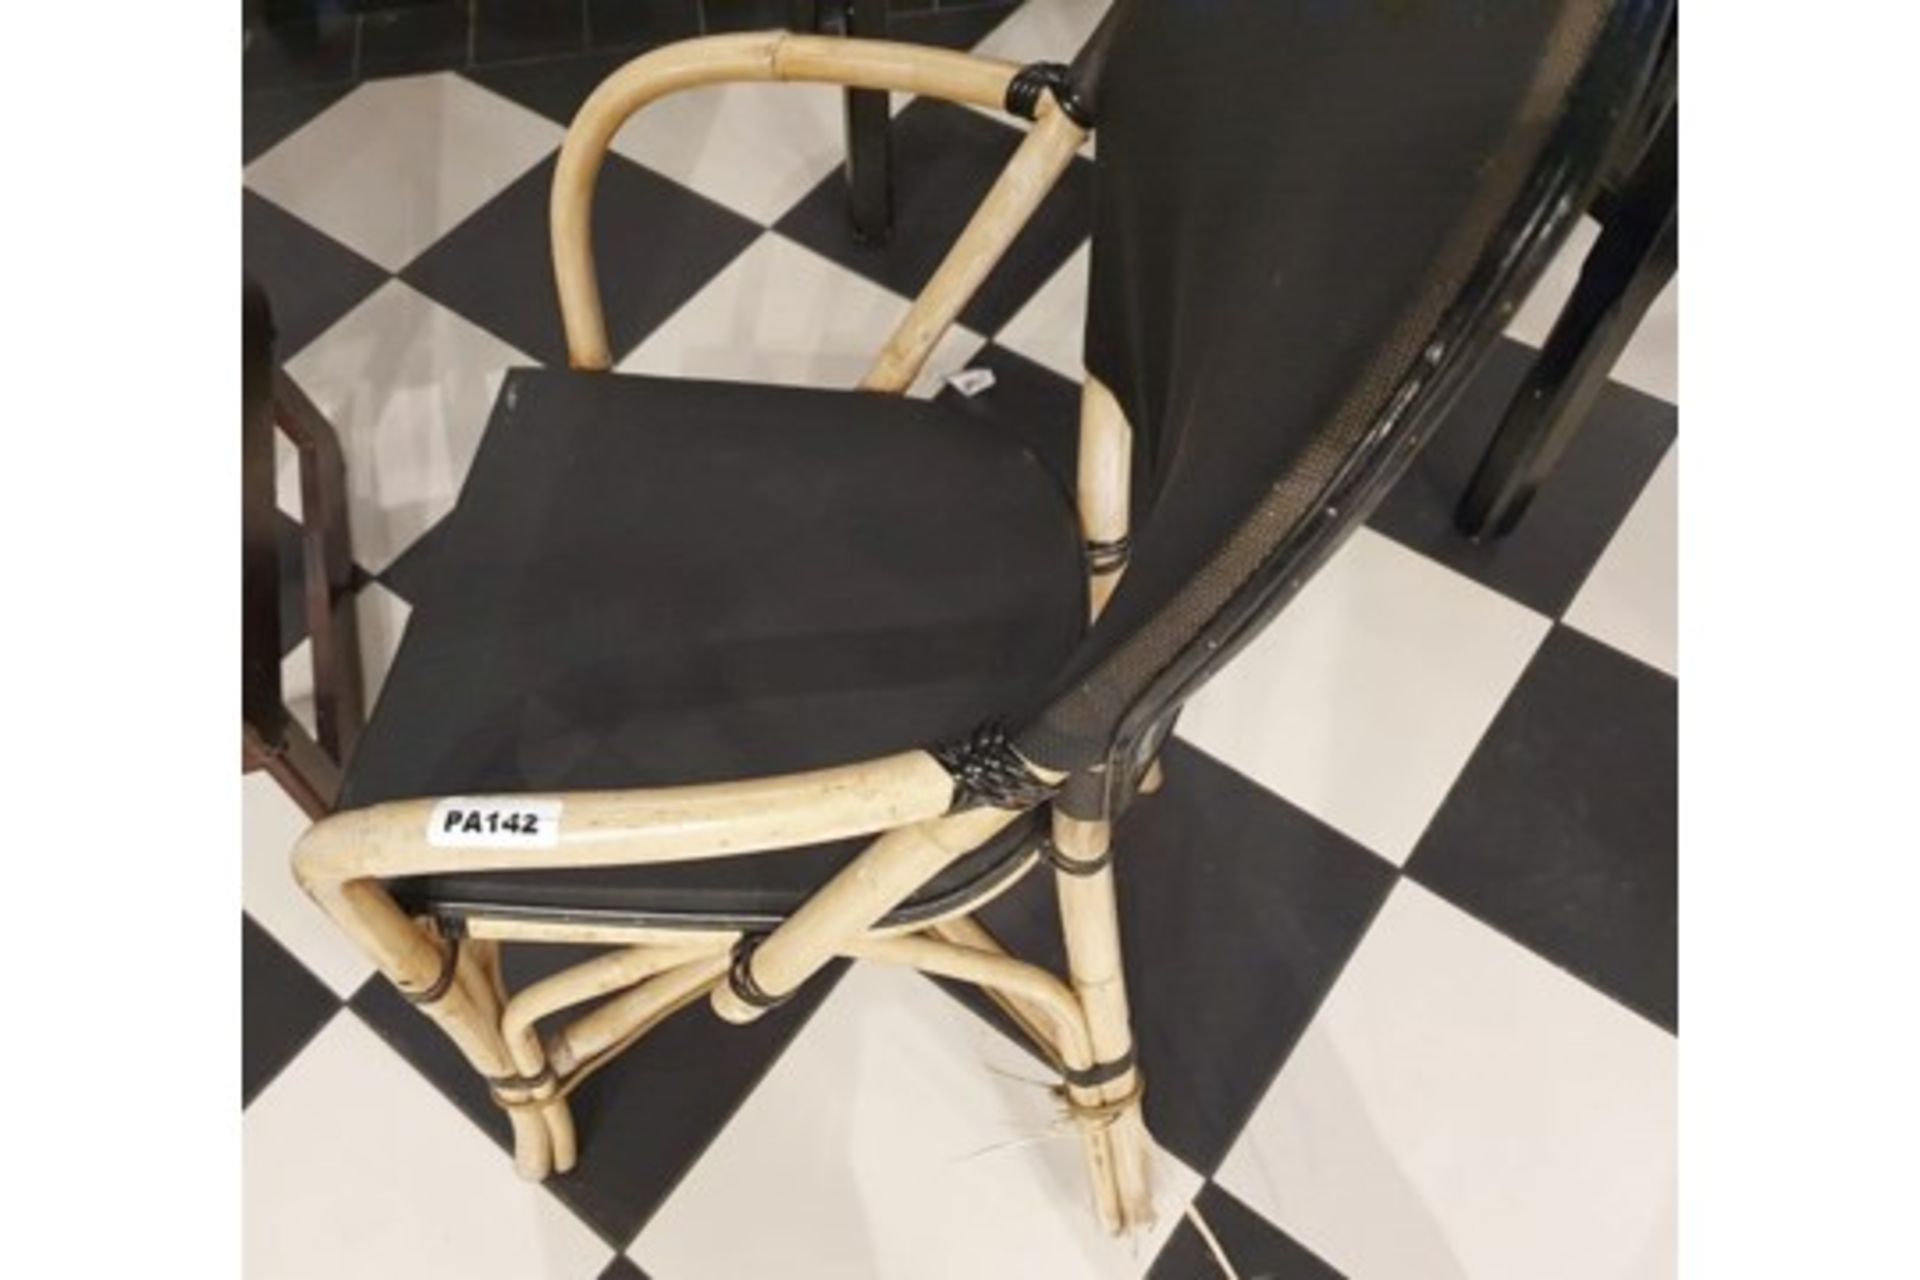 6 x Bamboo Studio Chairs With Black Seat and Back Rest - Features the Name 'PAUL' Printed on the - Image 4 of 5